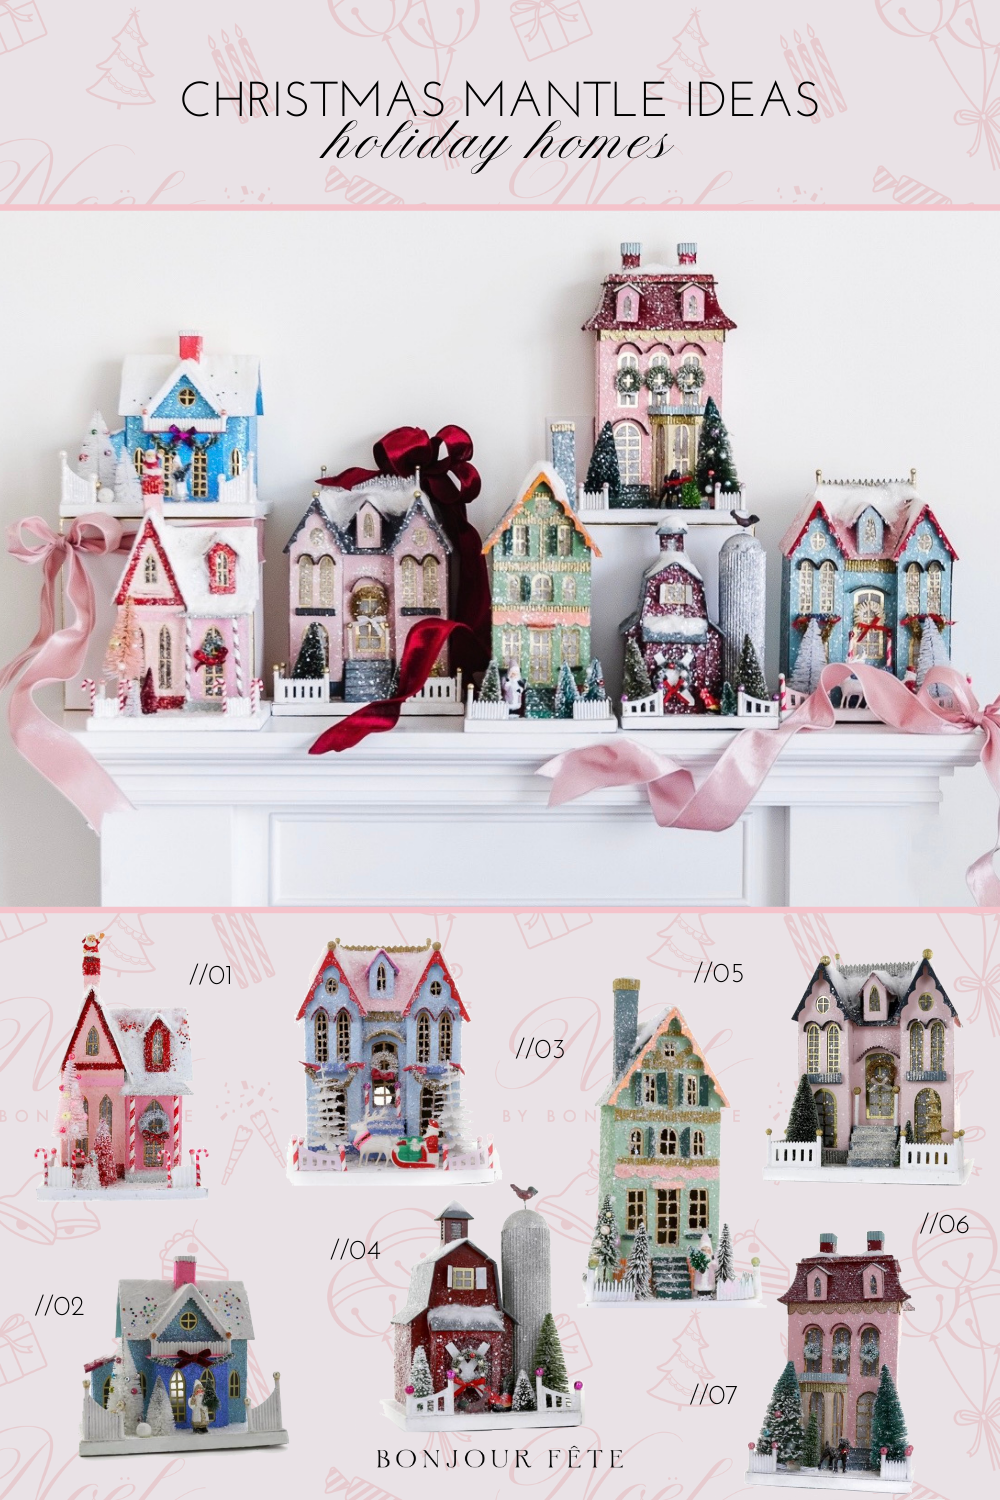 Cute Christmas houses to incorporate into your holiday village.